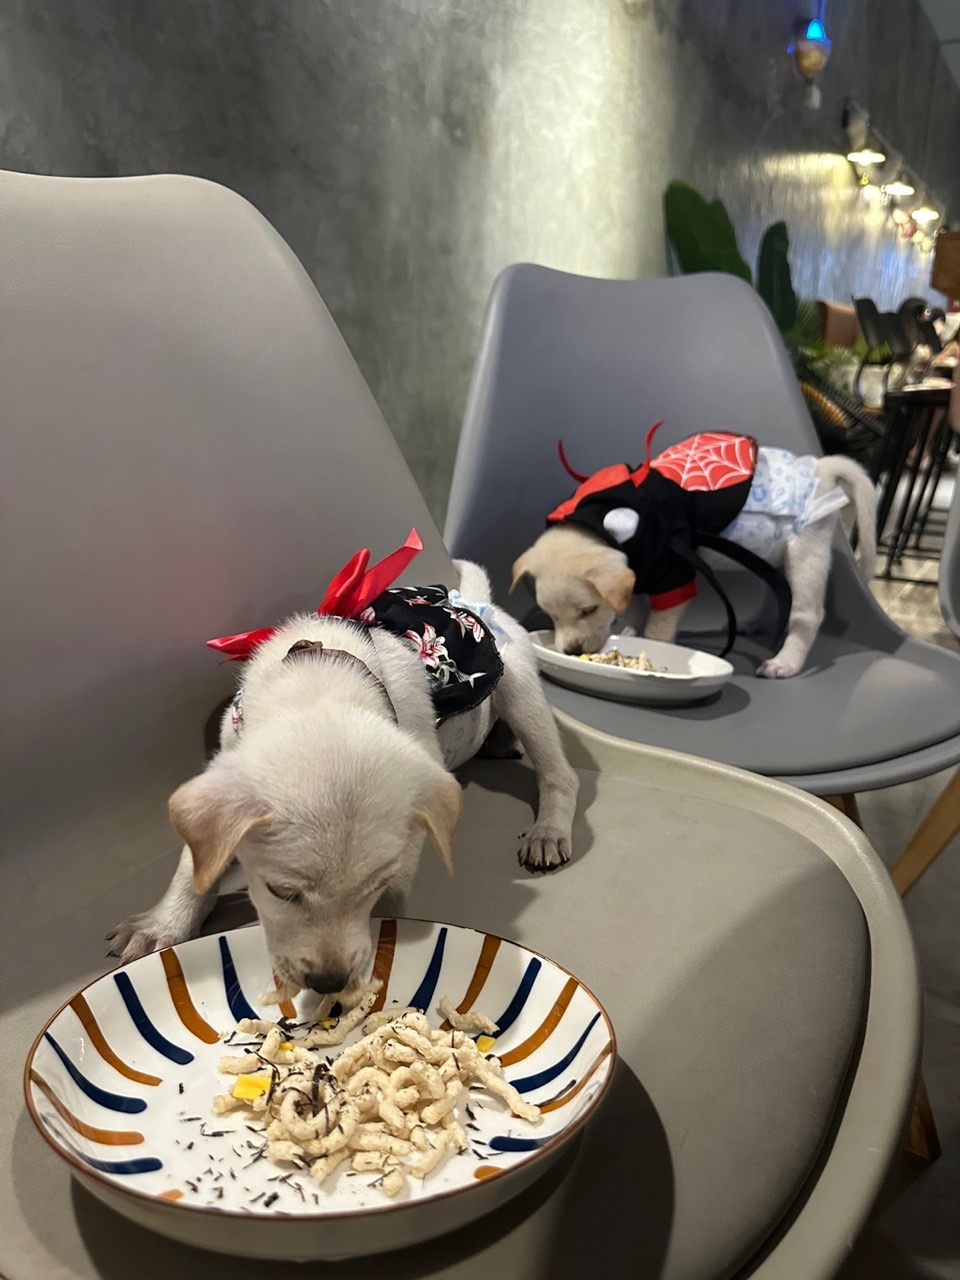 Puppies eating dog food at a cafe